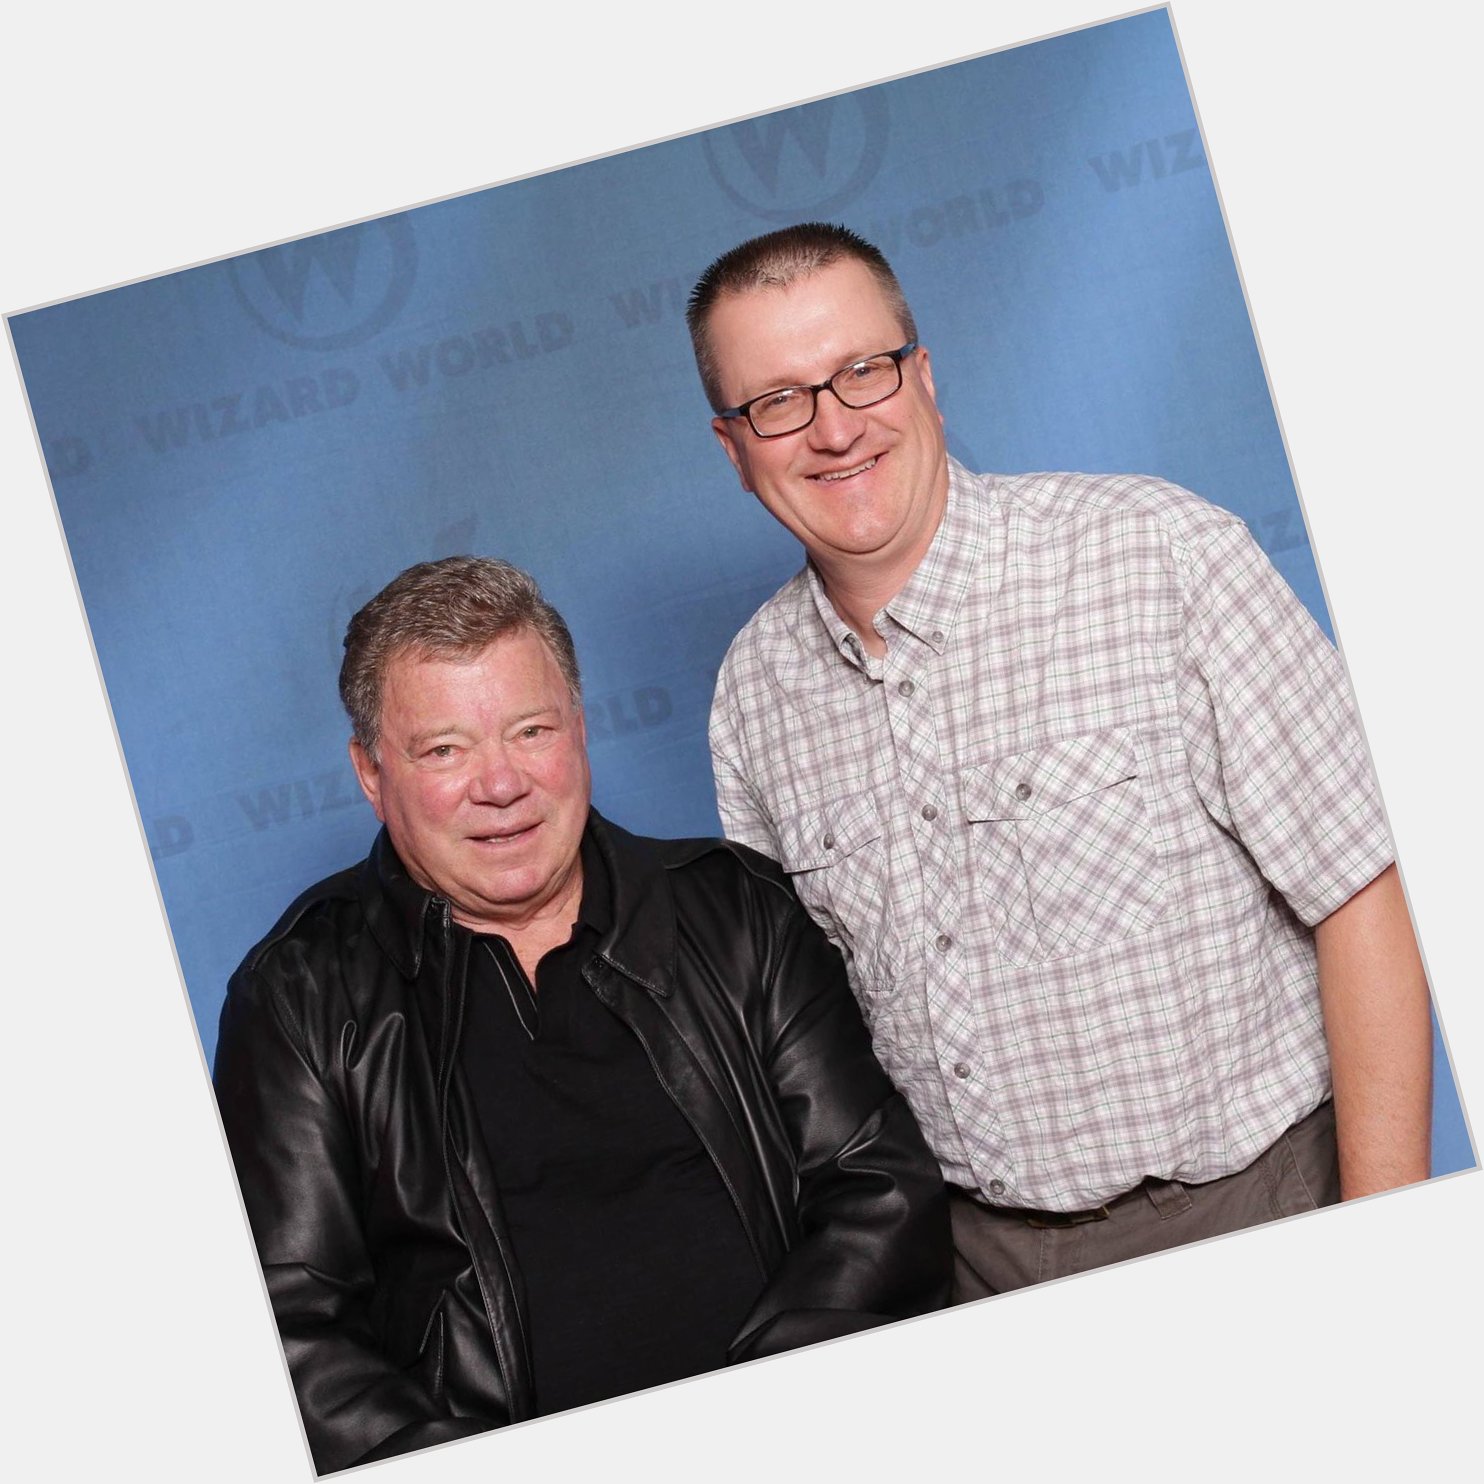 Happy 88th birthday to the best Captain of the U.S.S. Enterprise, William Shatner!   